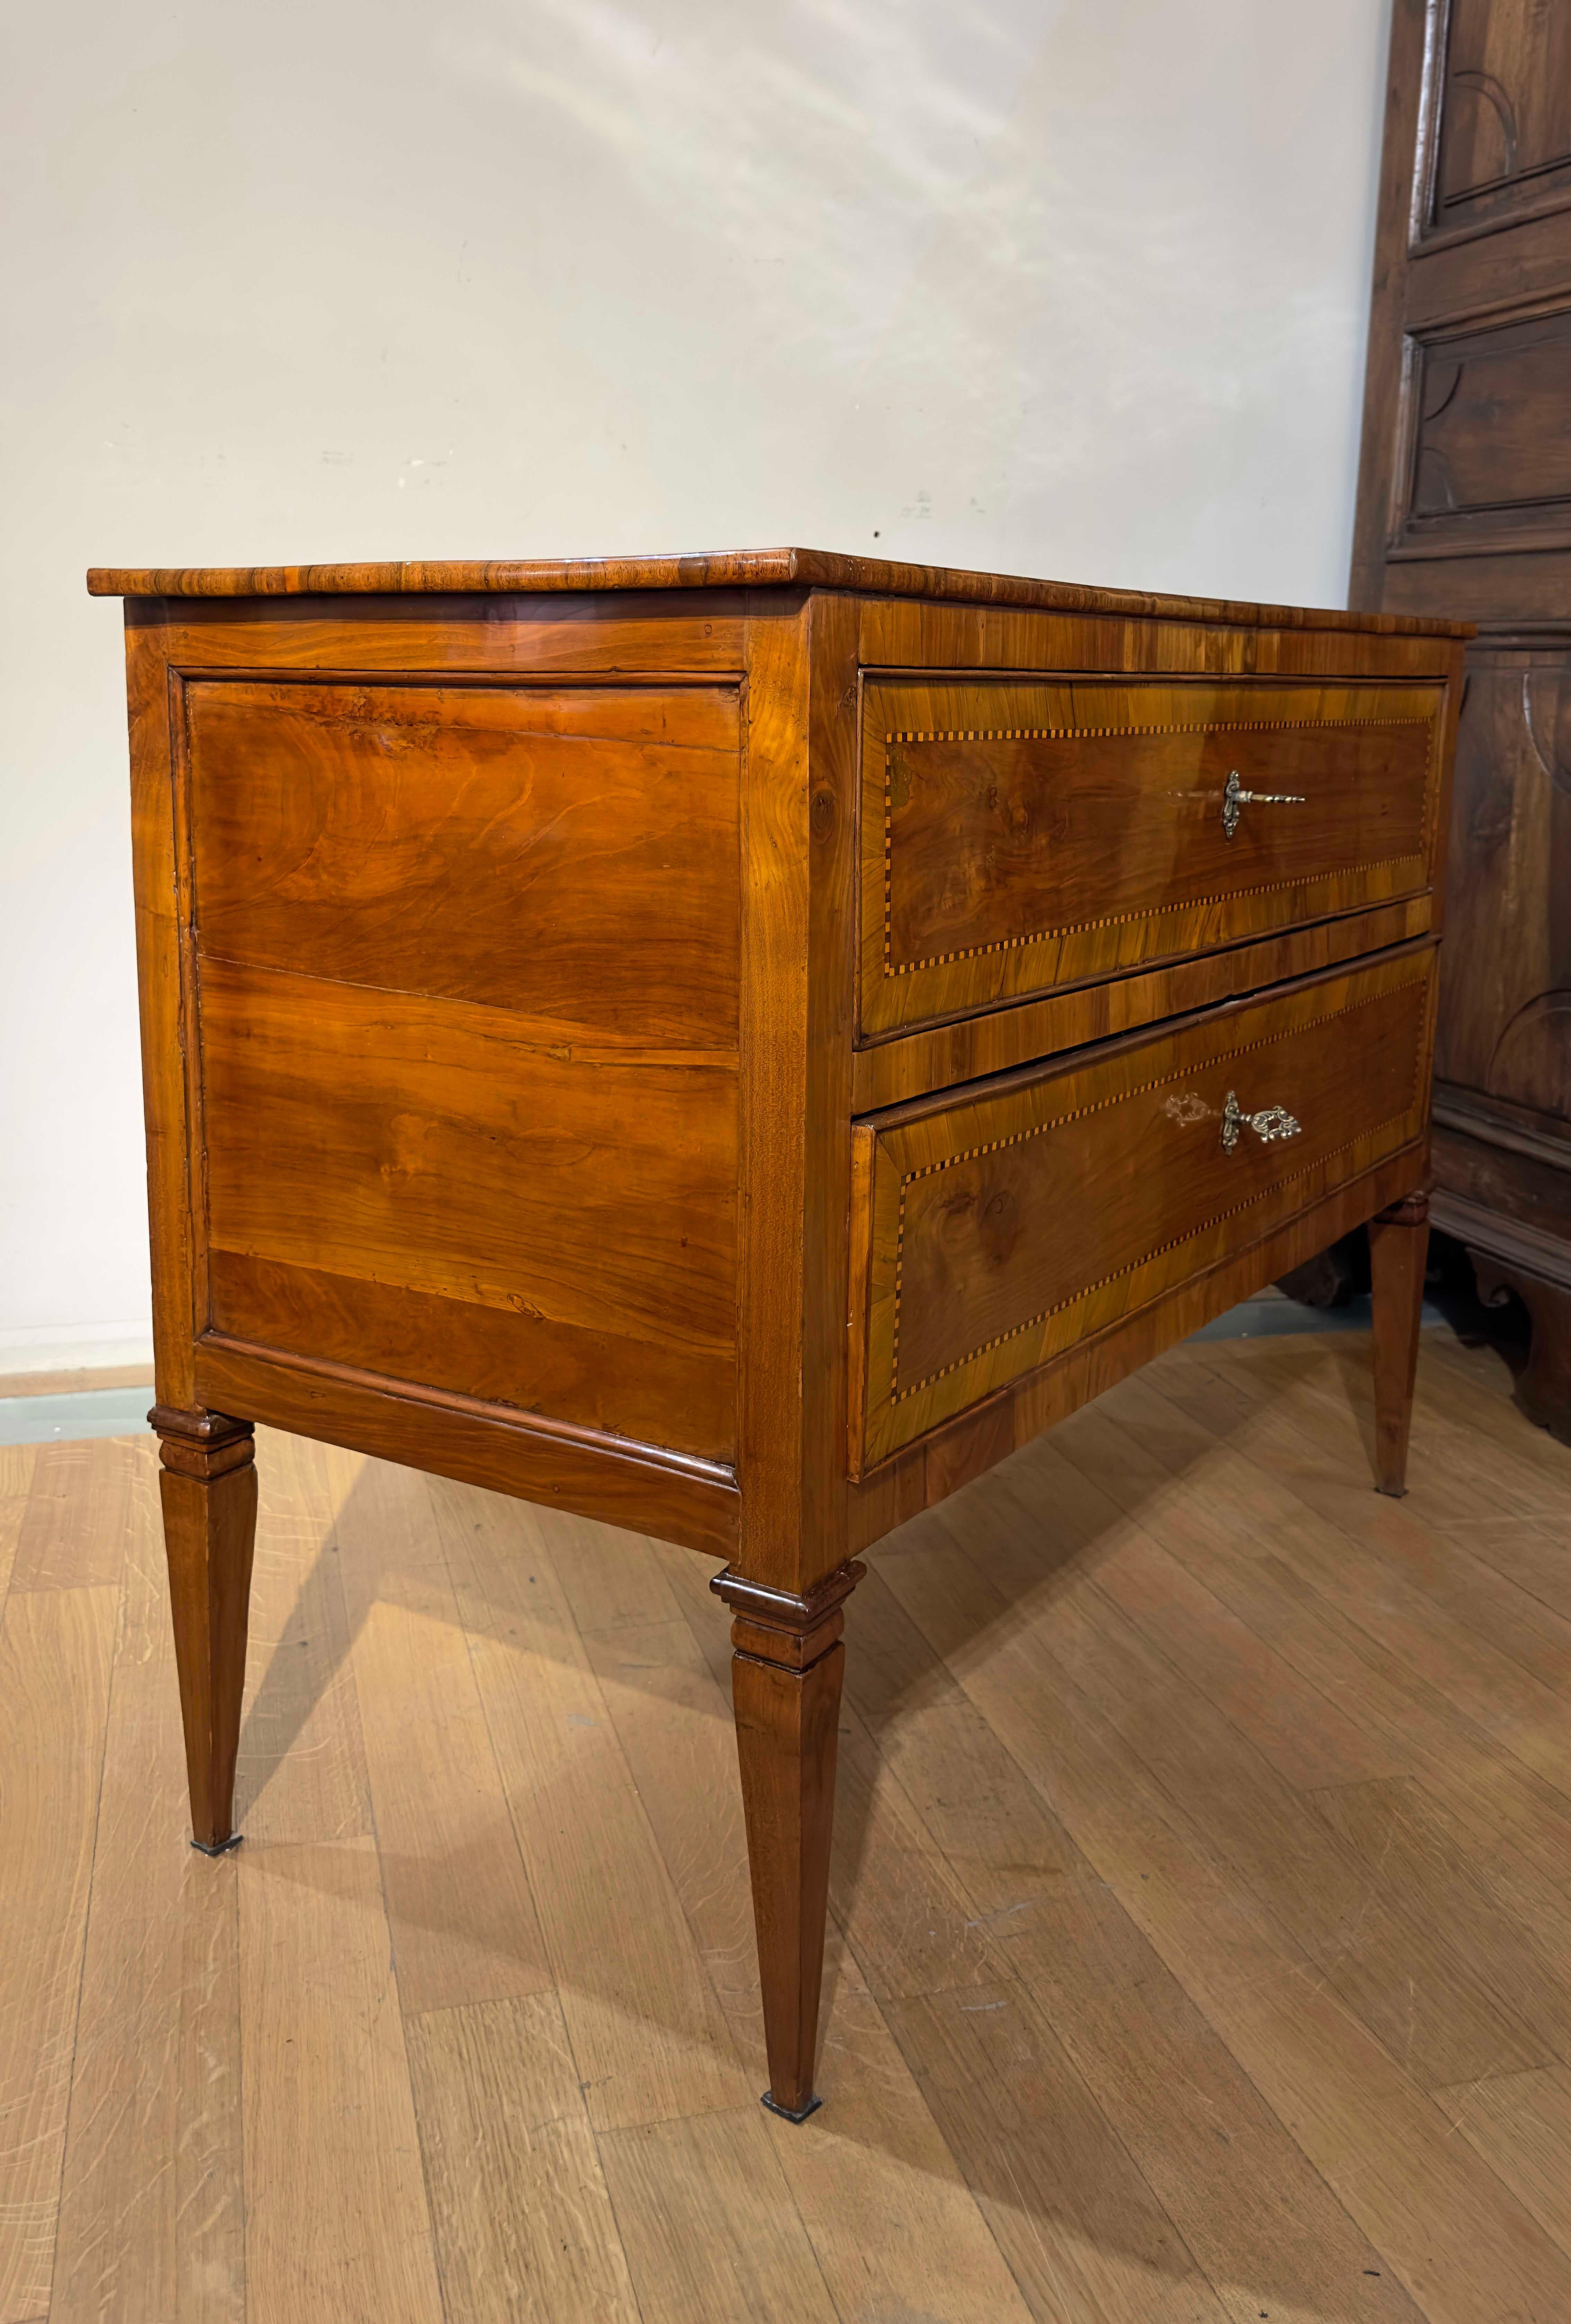 Italian 18th CENTURY LOUIS XVI CHEST OF SOLID CHERRY WOOD AND SLABS